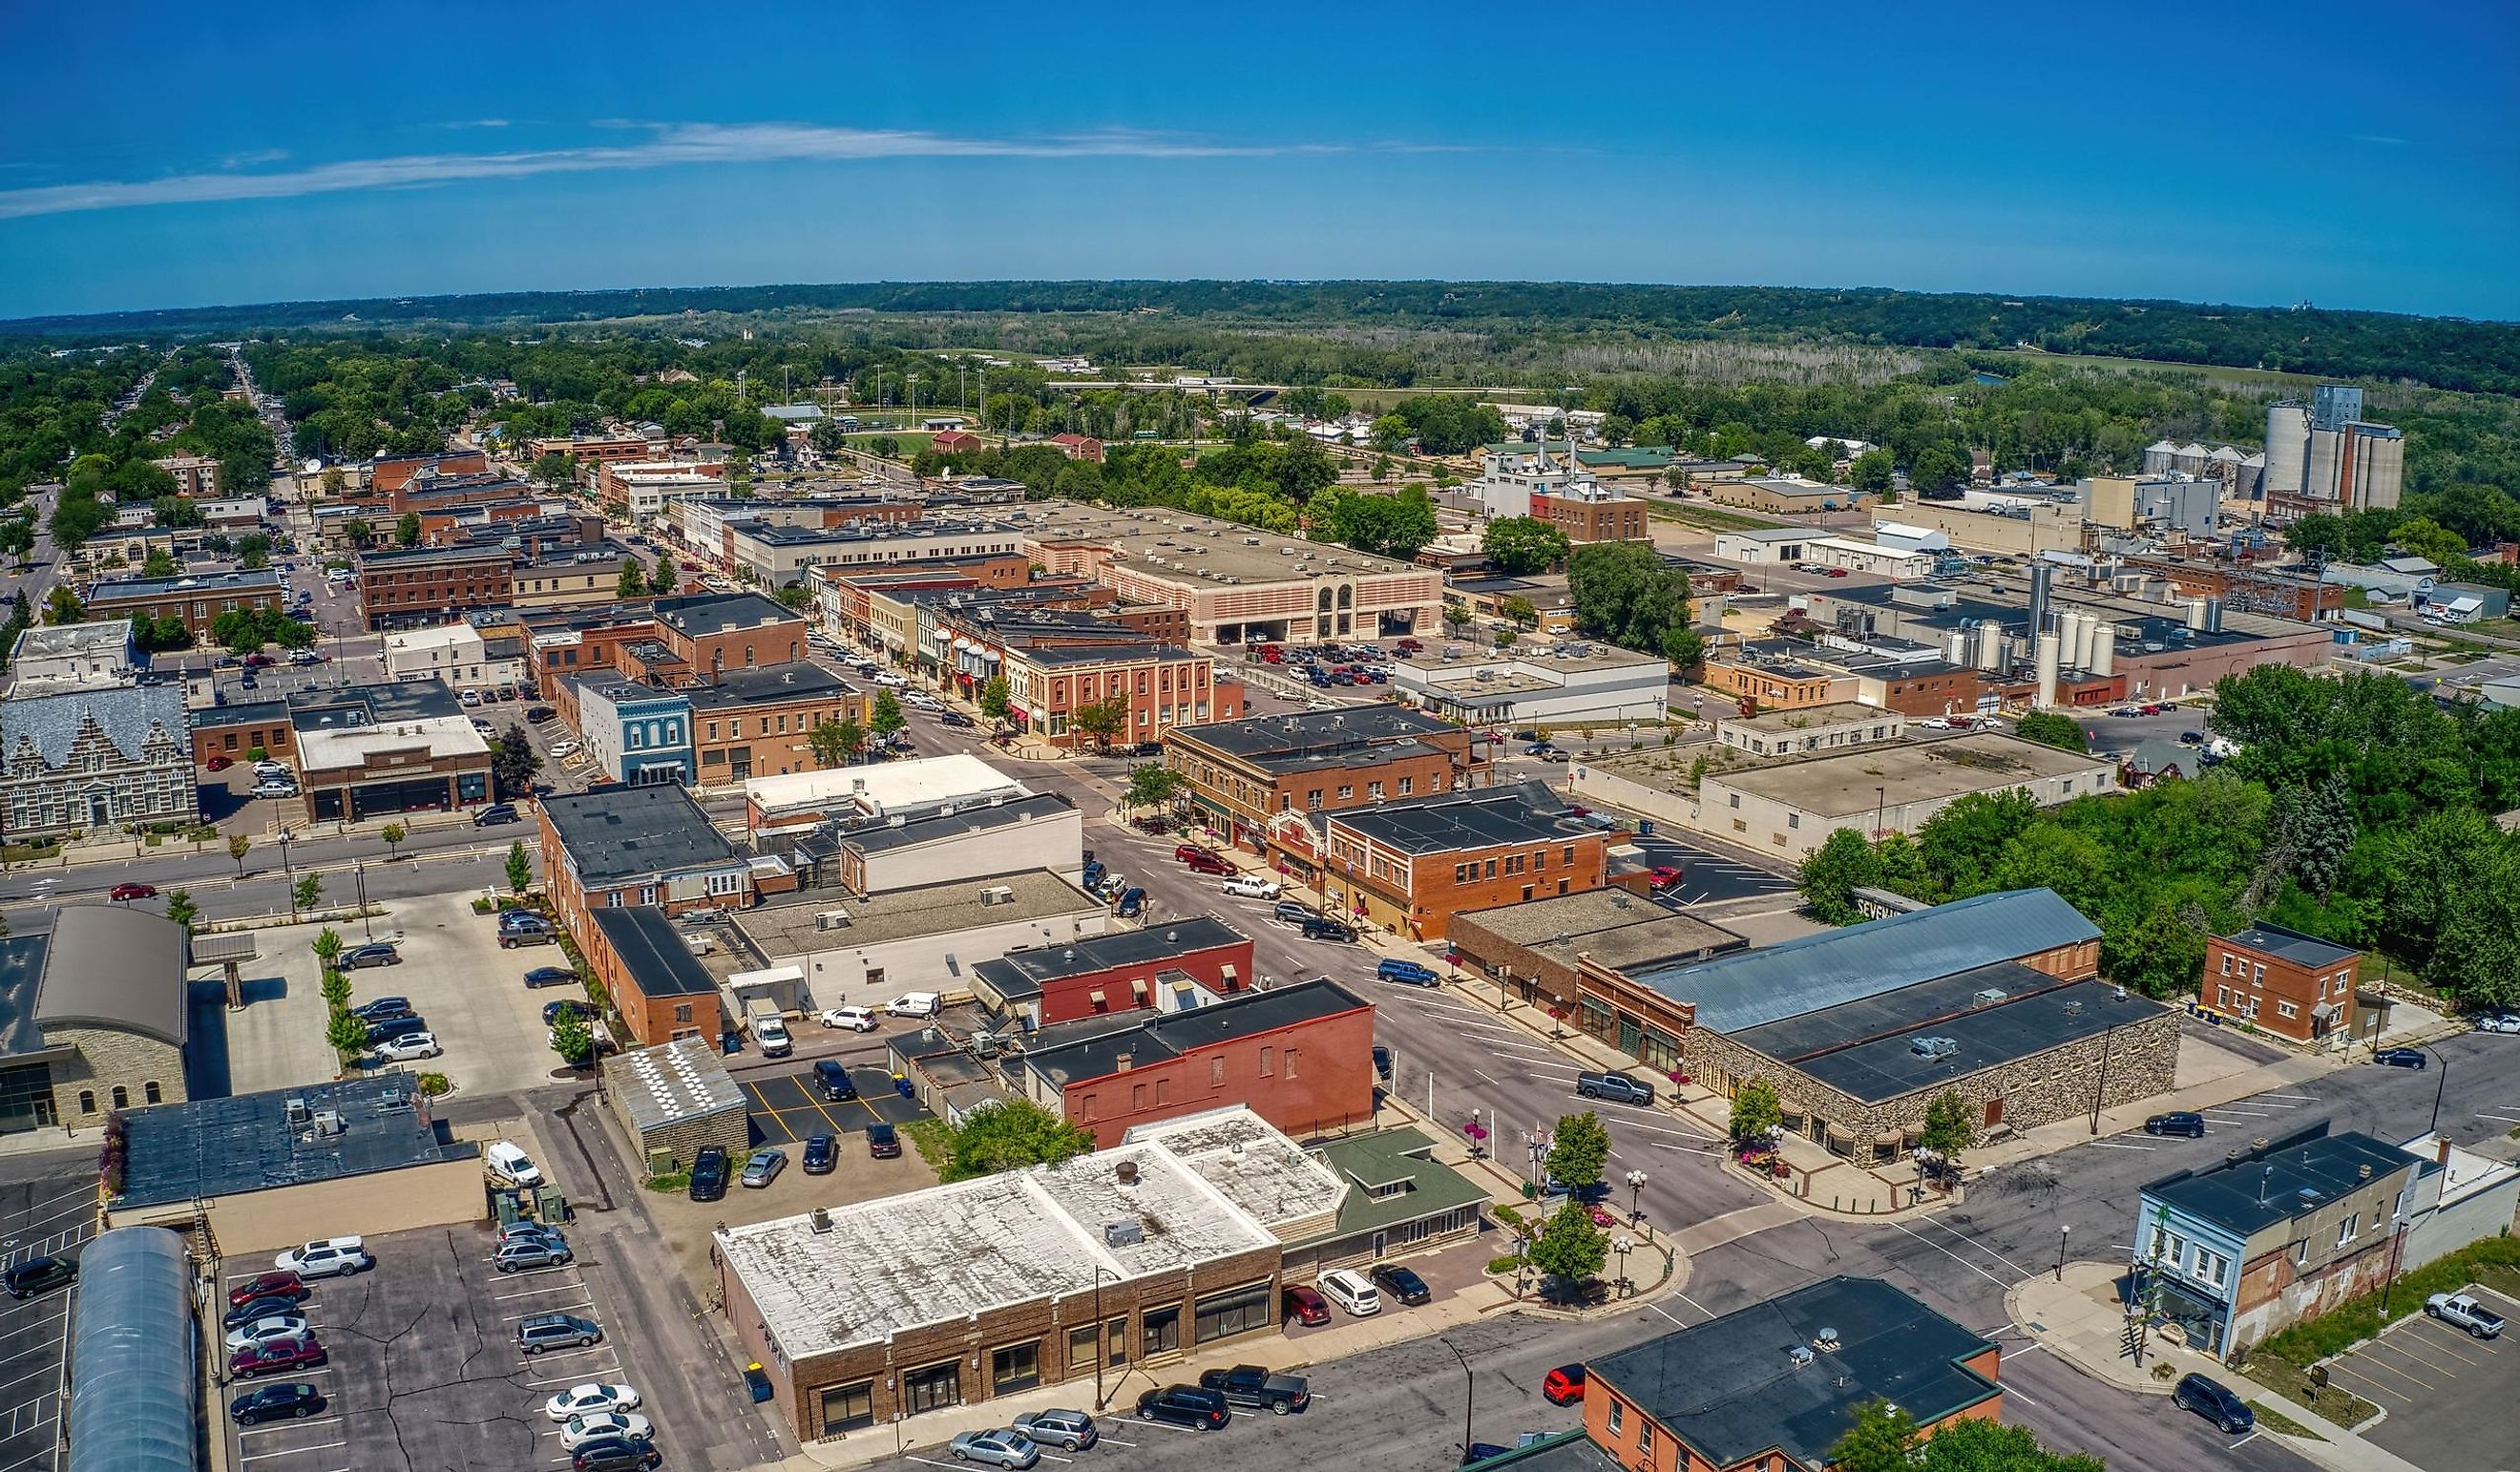 Aerial View of the German Inspired New Ulm, Minnesota.